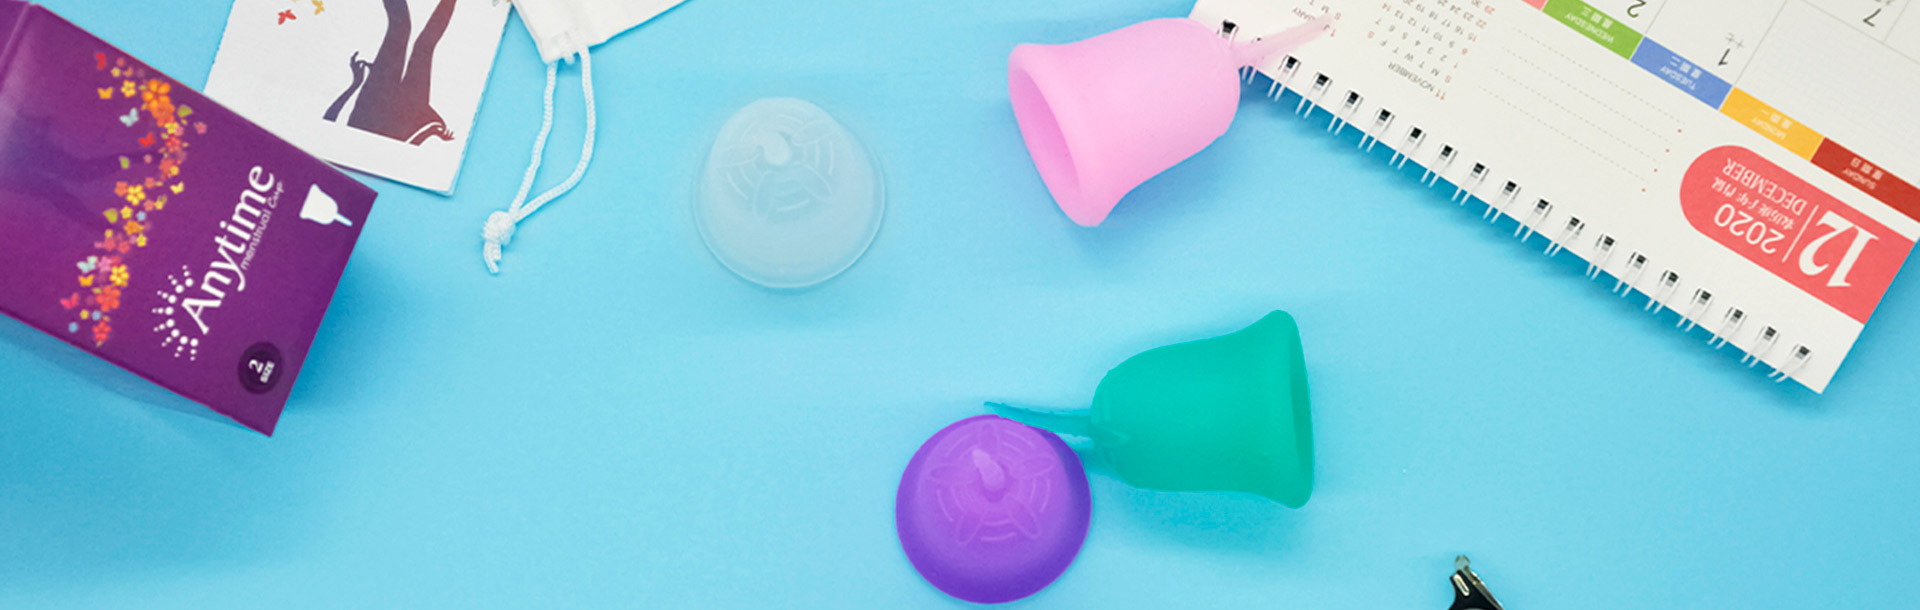 Anytime Menstrual Cup